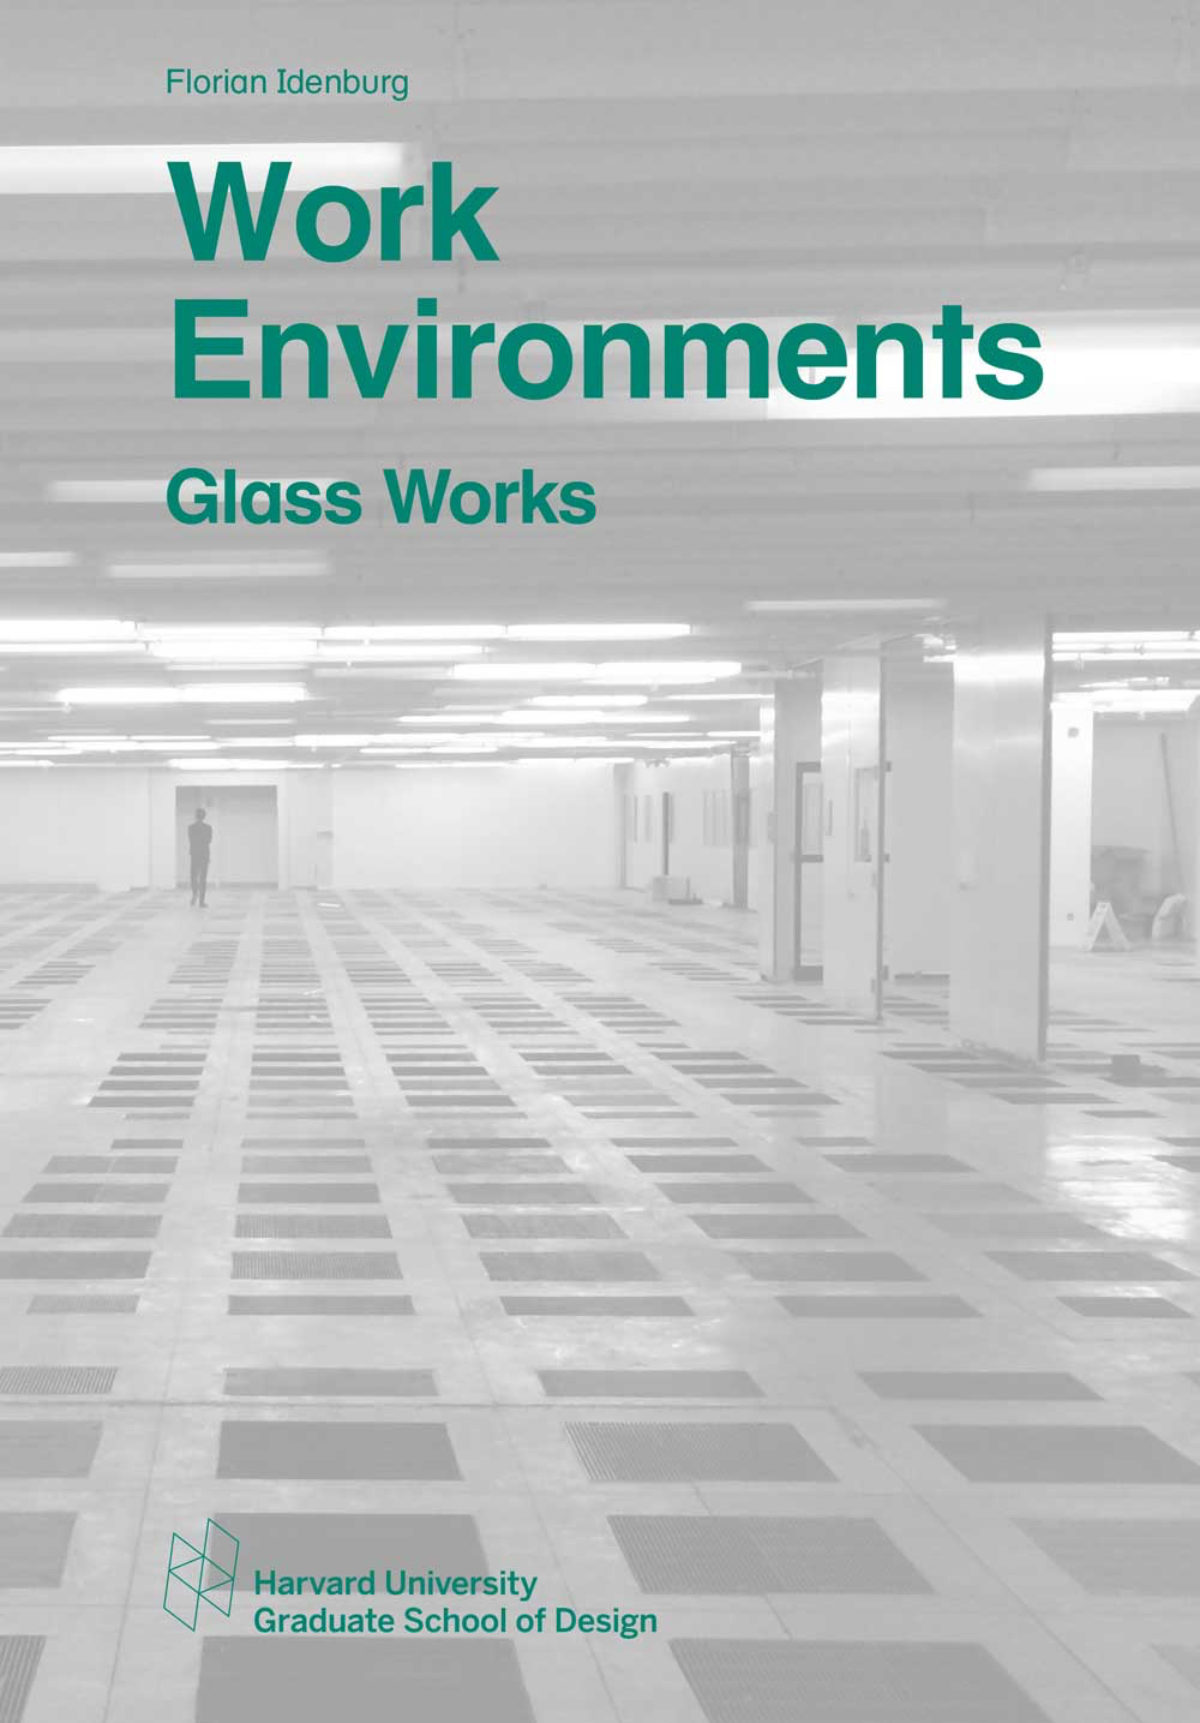 Work Environments: Glass Works